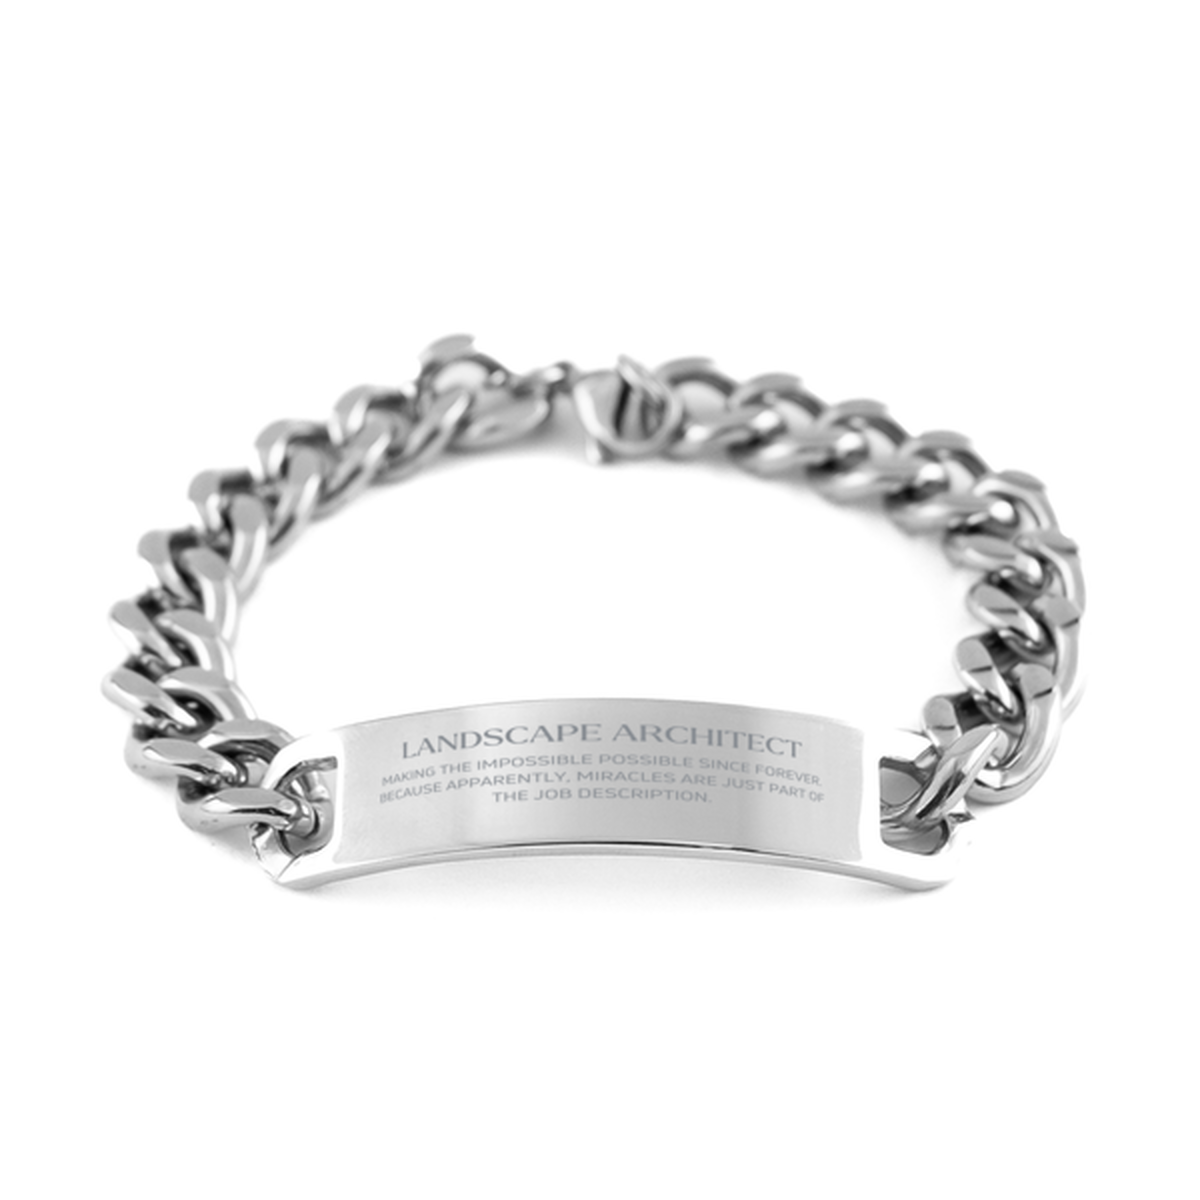 Funny Landscape Architect Gifts, Miracles are just part of the job description, Inspirational Birthday Cuban Chain Stainless Steel Bracelet For Landscape Architect, Men, Women, Coworkers, Friends, Boss